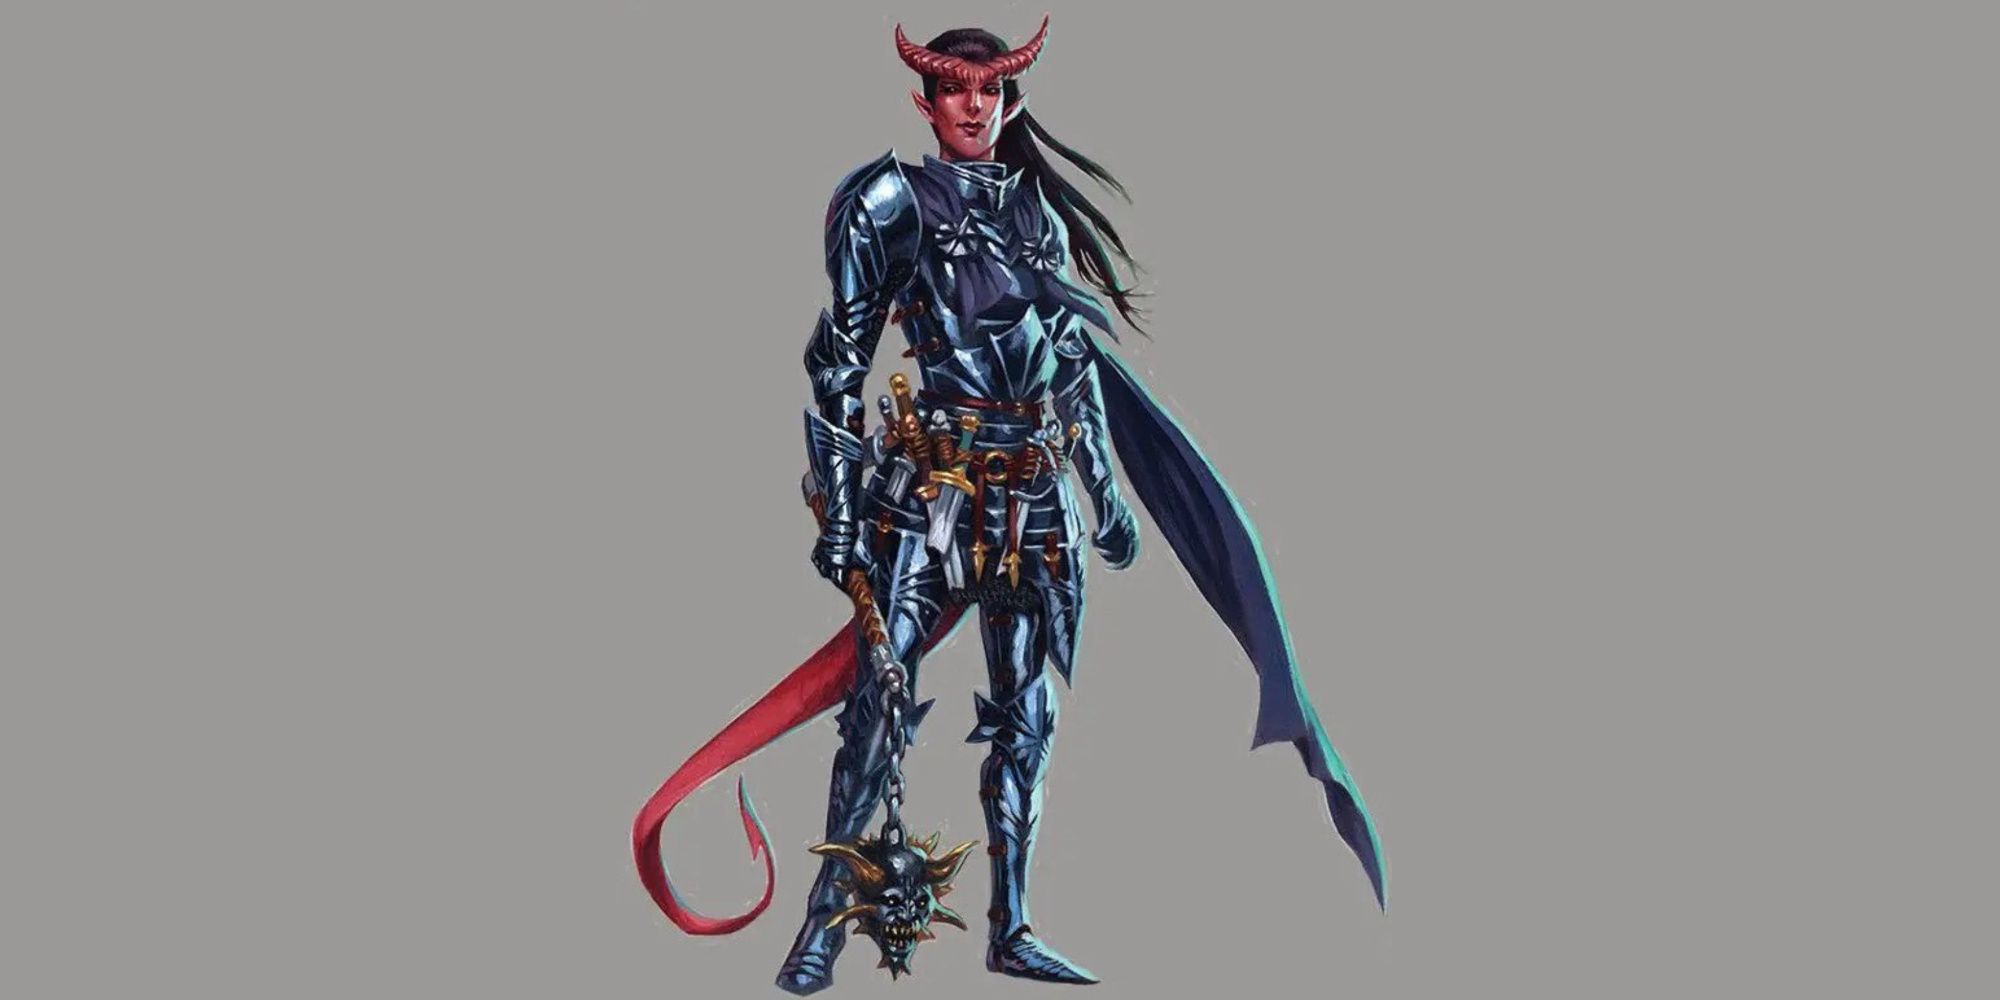 Conquest Paladin tiefling holding a morning star and in black armor